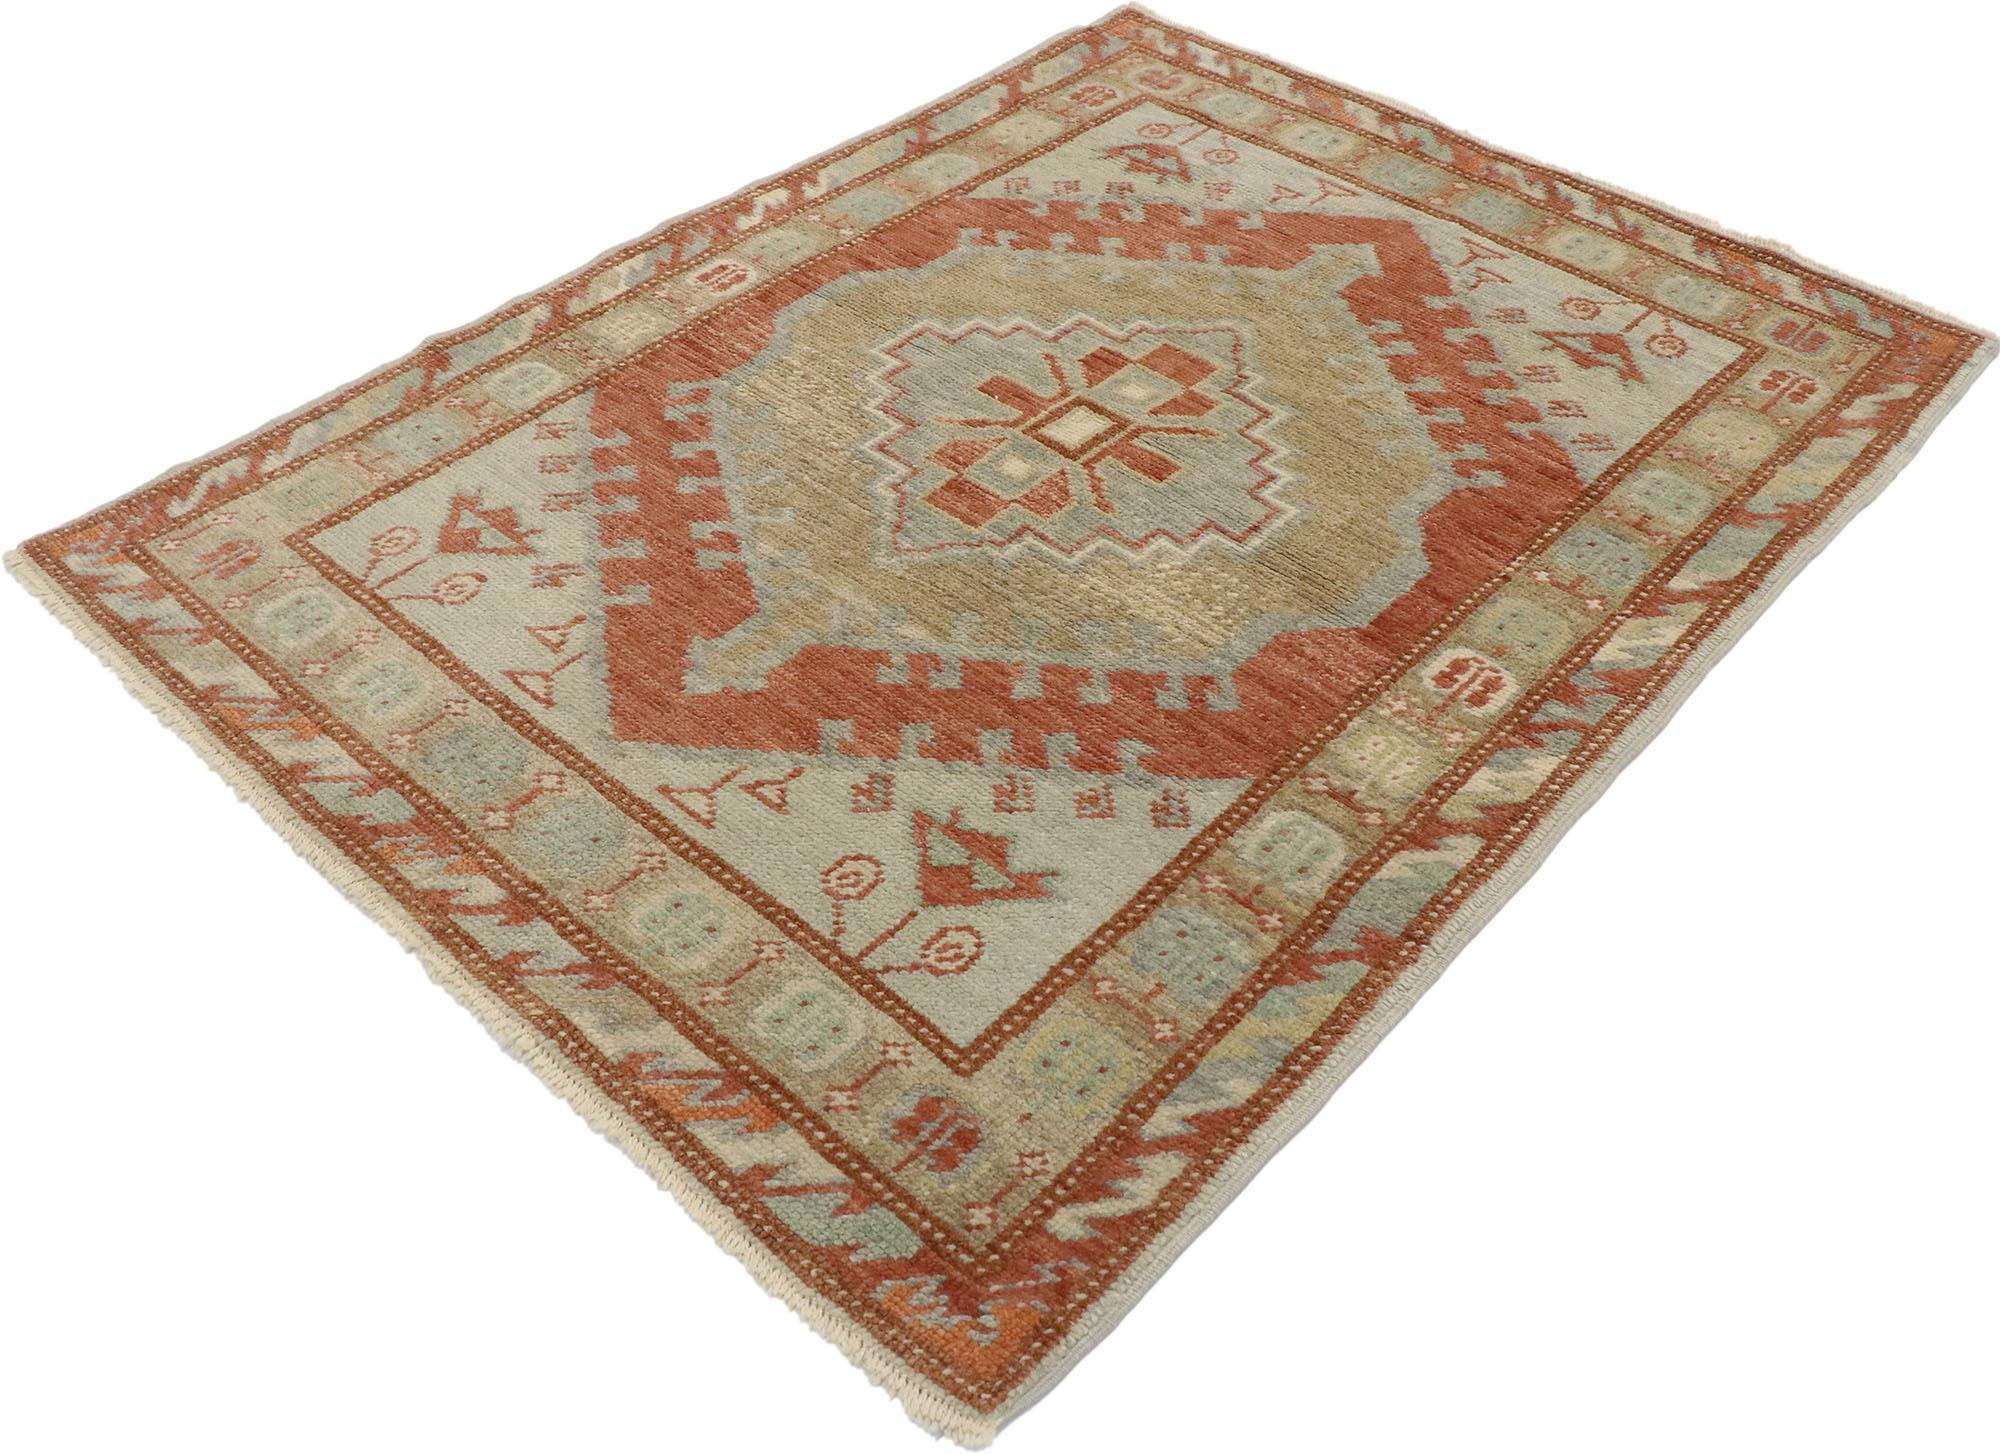 53384 New contemporary Turkish Oushak rug with modern rustic Tribal style. With tribal charm and timeless appeal in an earthy-inspired colorway, this hand knotted wool contemporary Turkish Oushak rug will take on a curated lived-in look that feels